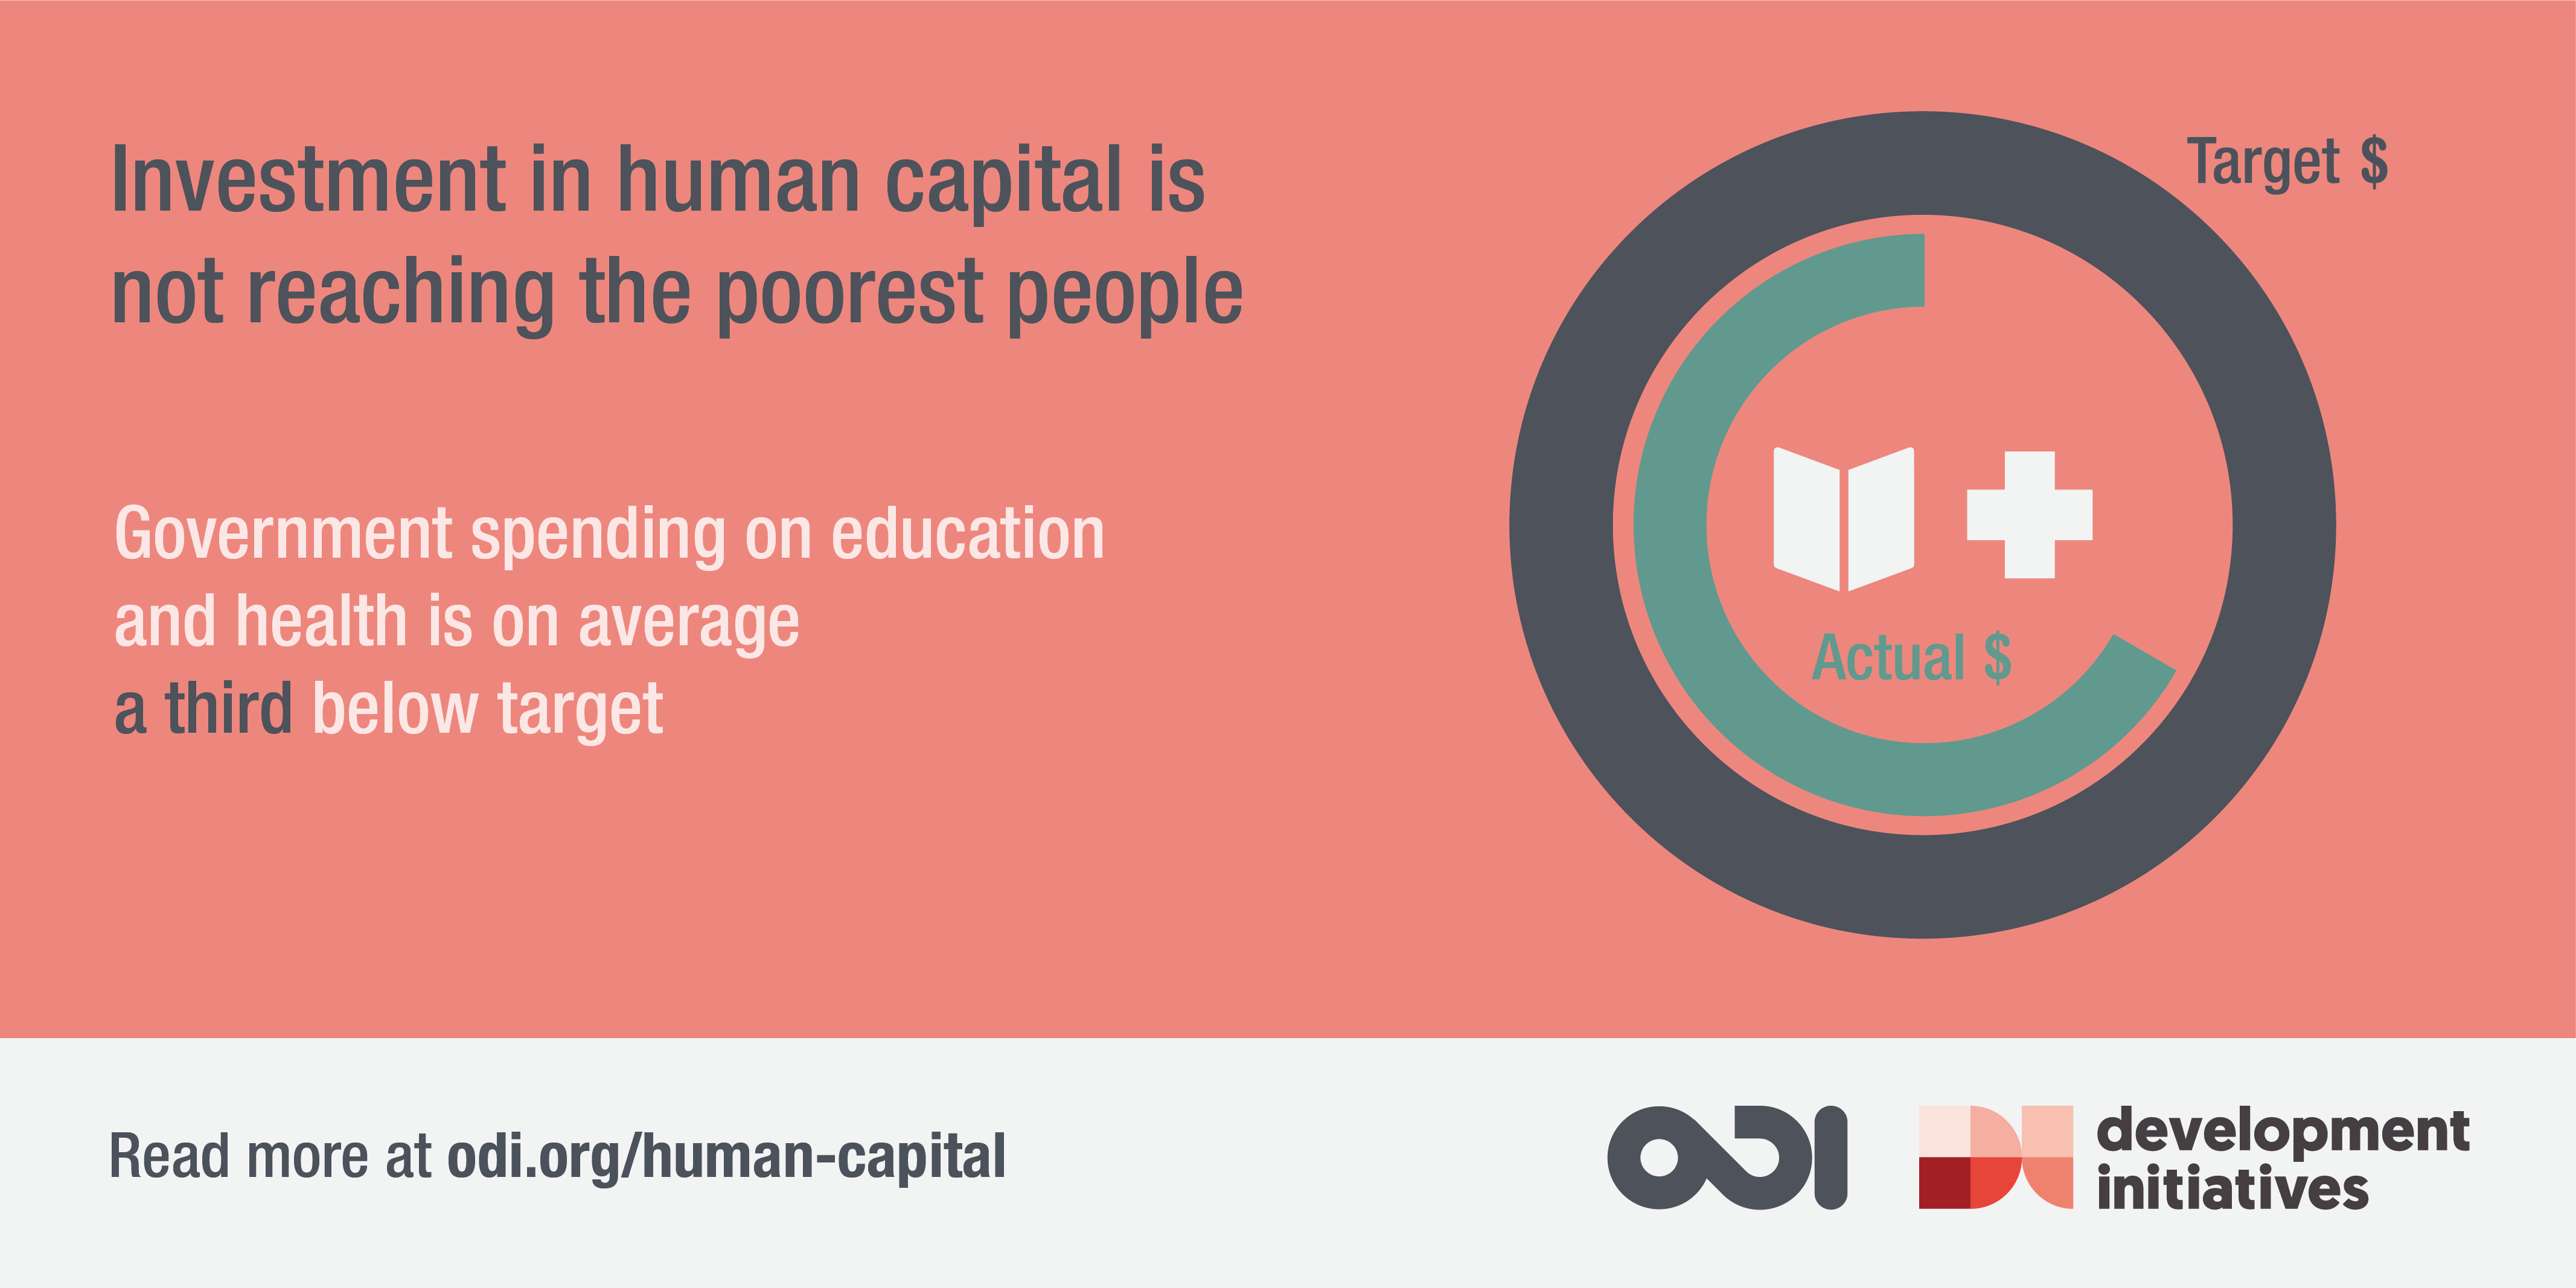 Government spending on education and health is on average  a third below target